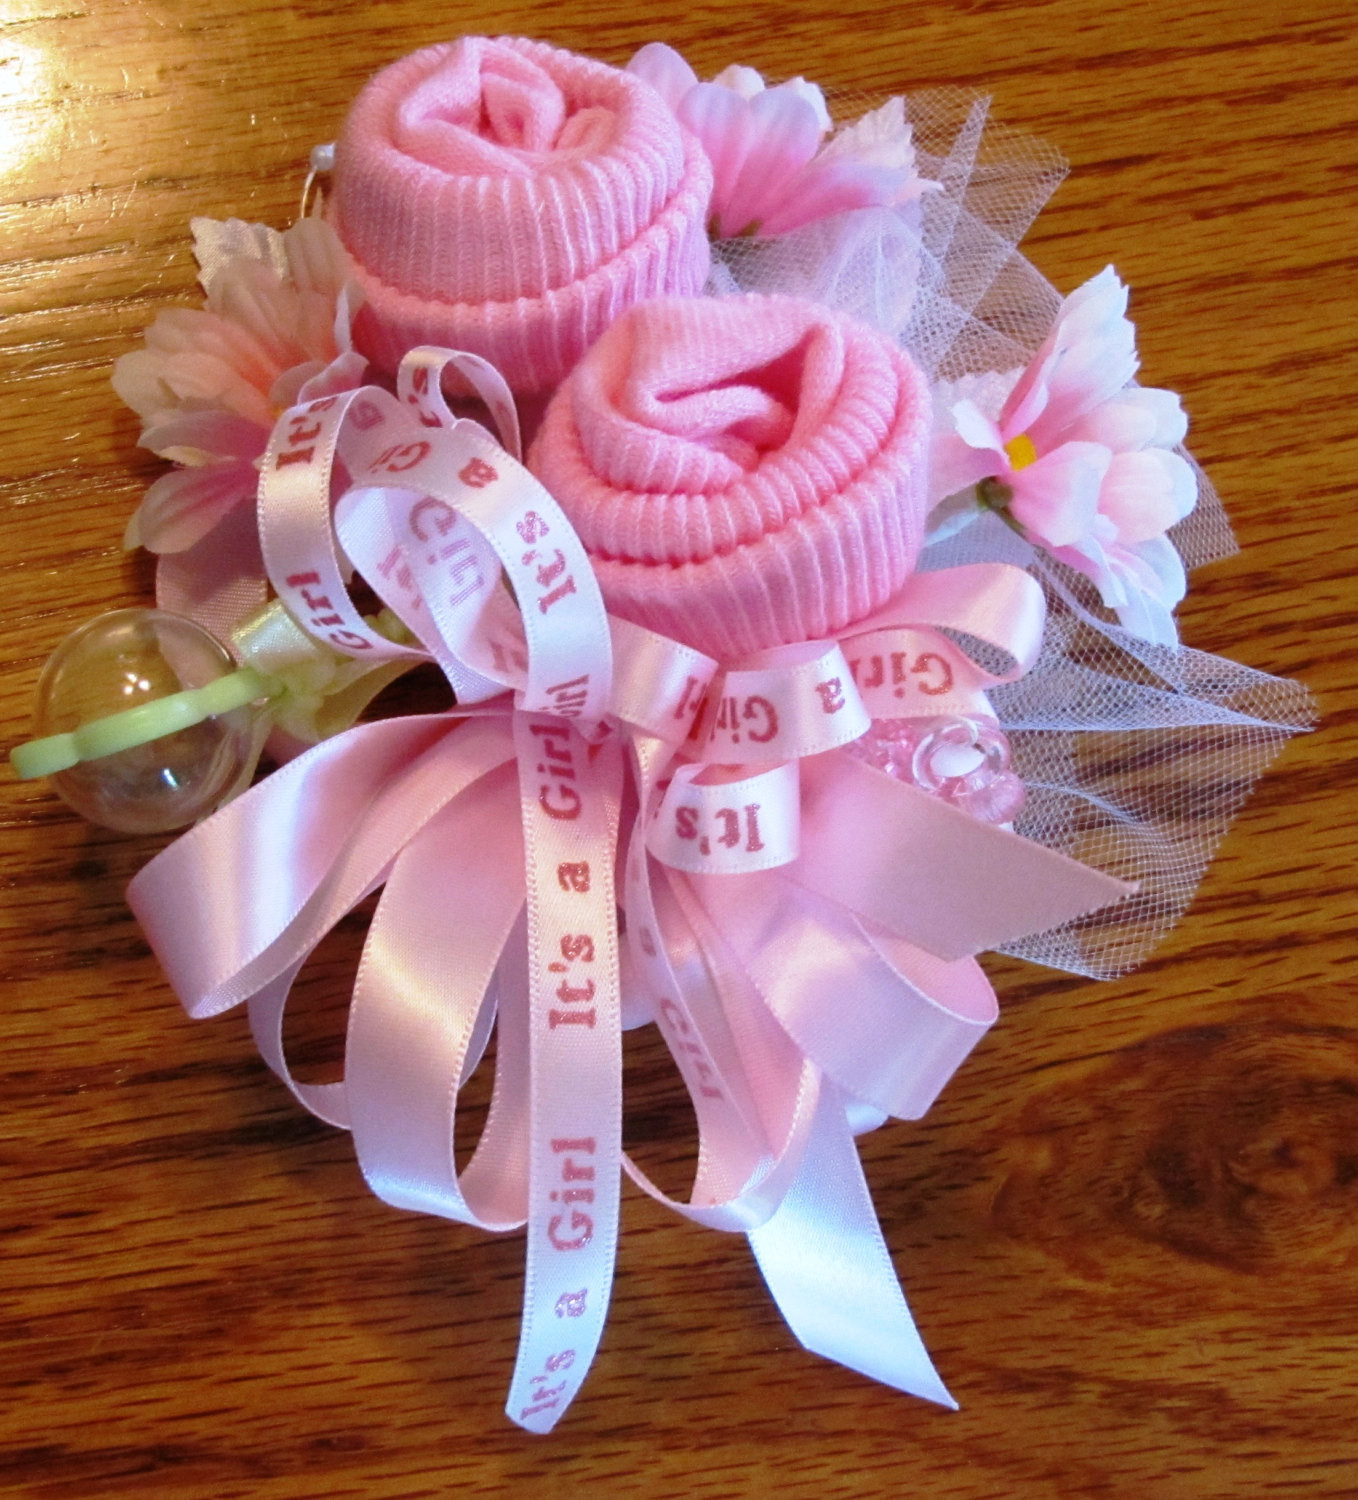 Baby Shower Corsages DIY
 The Best Baby Shower Corsages Diy Home Inspiration and